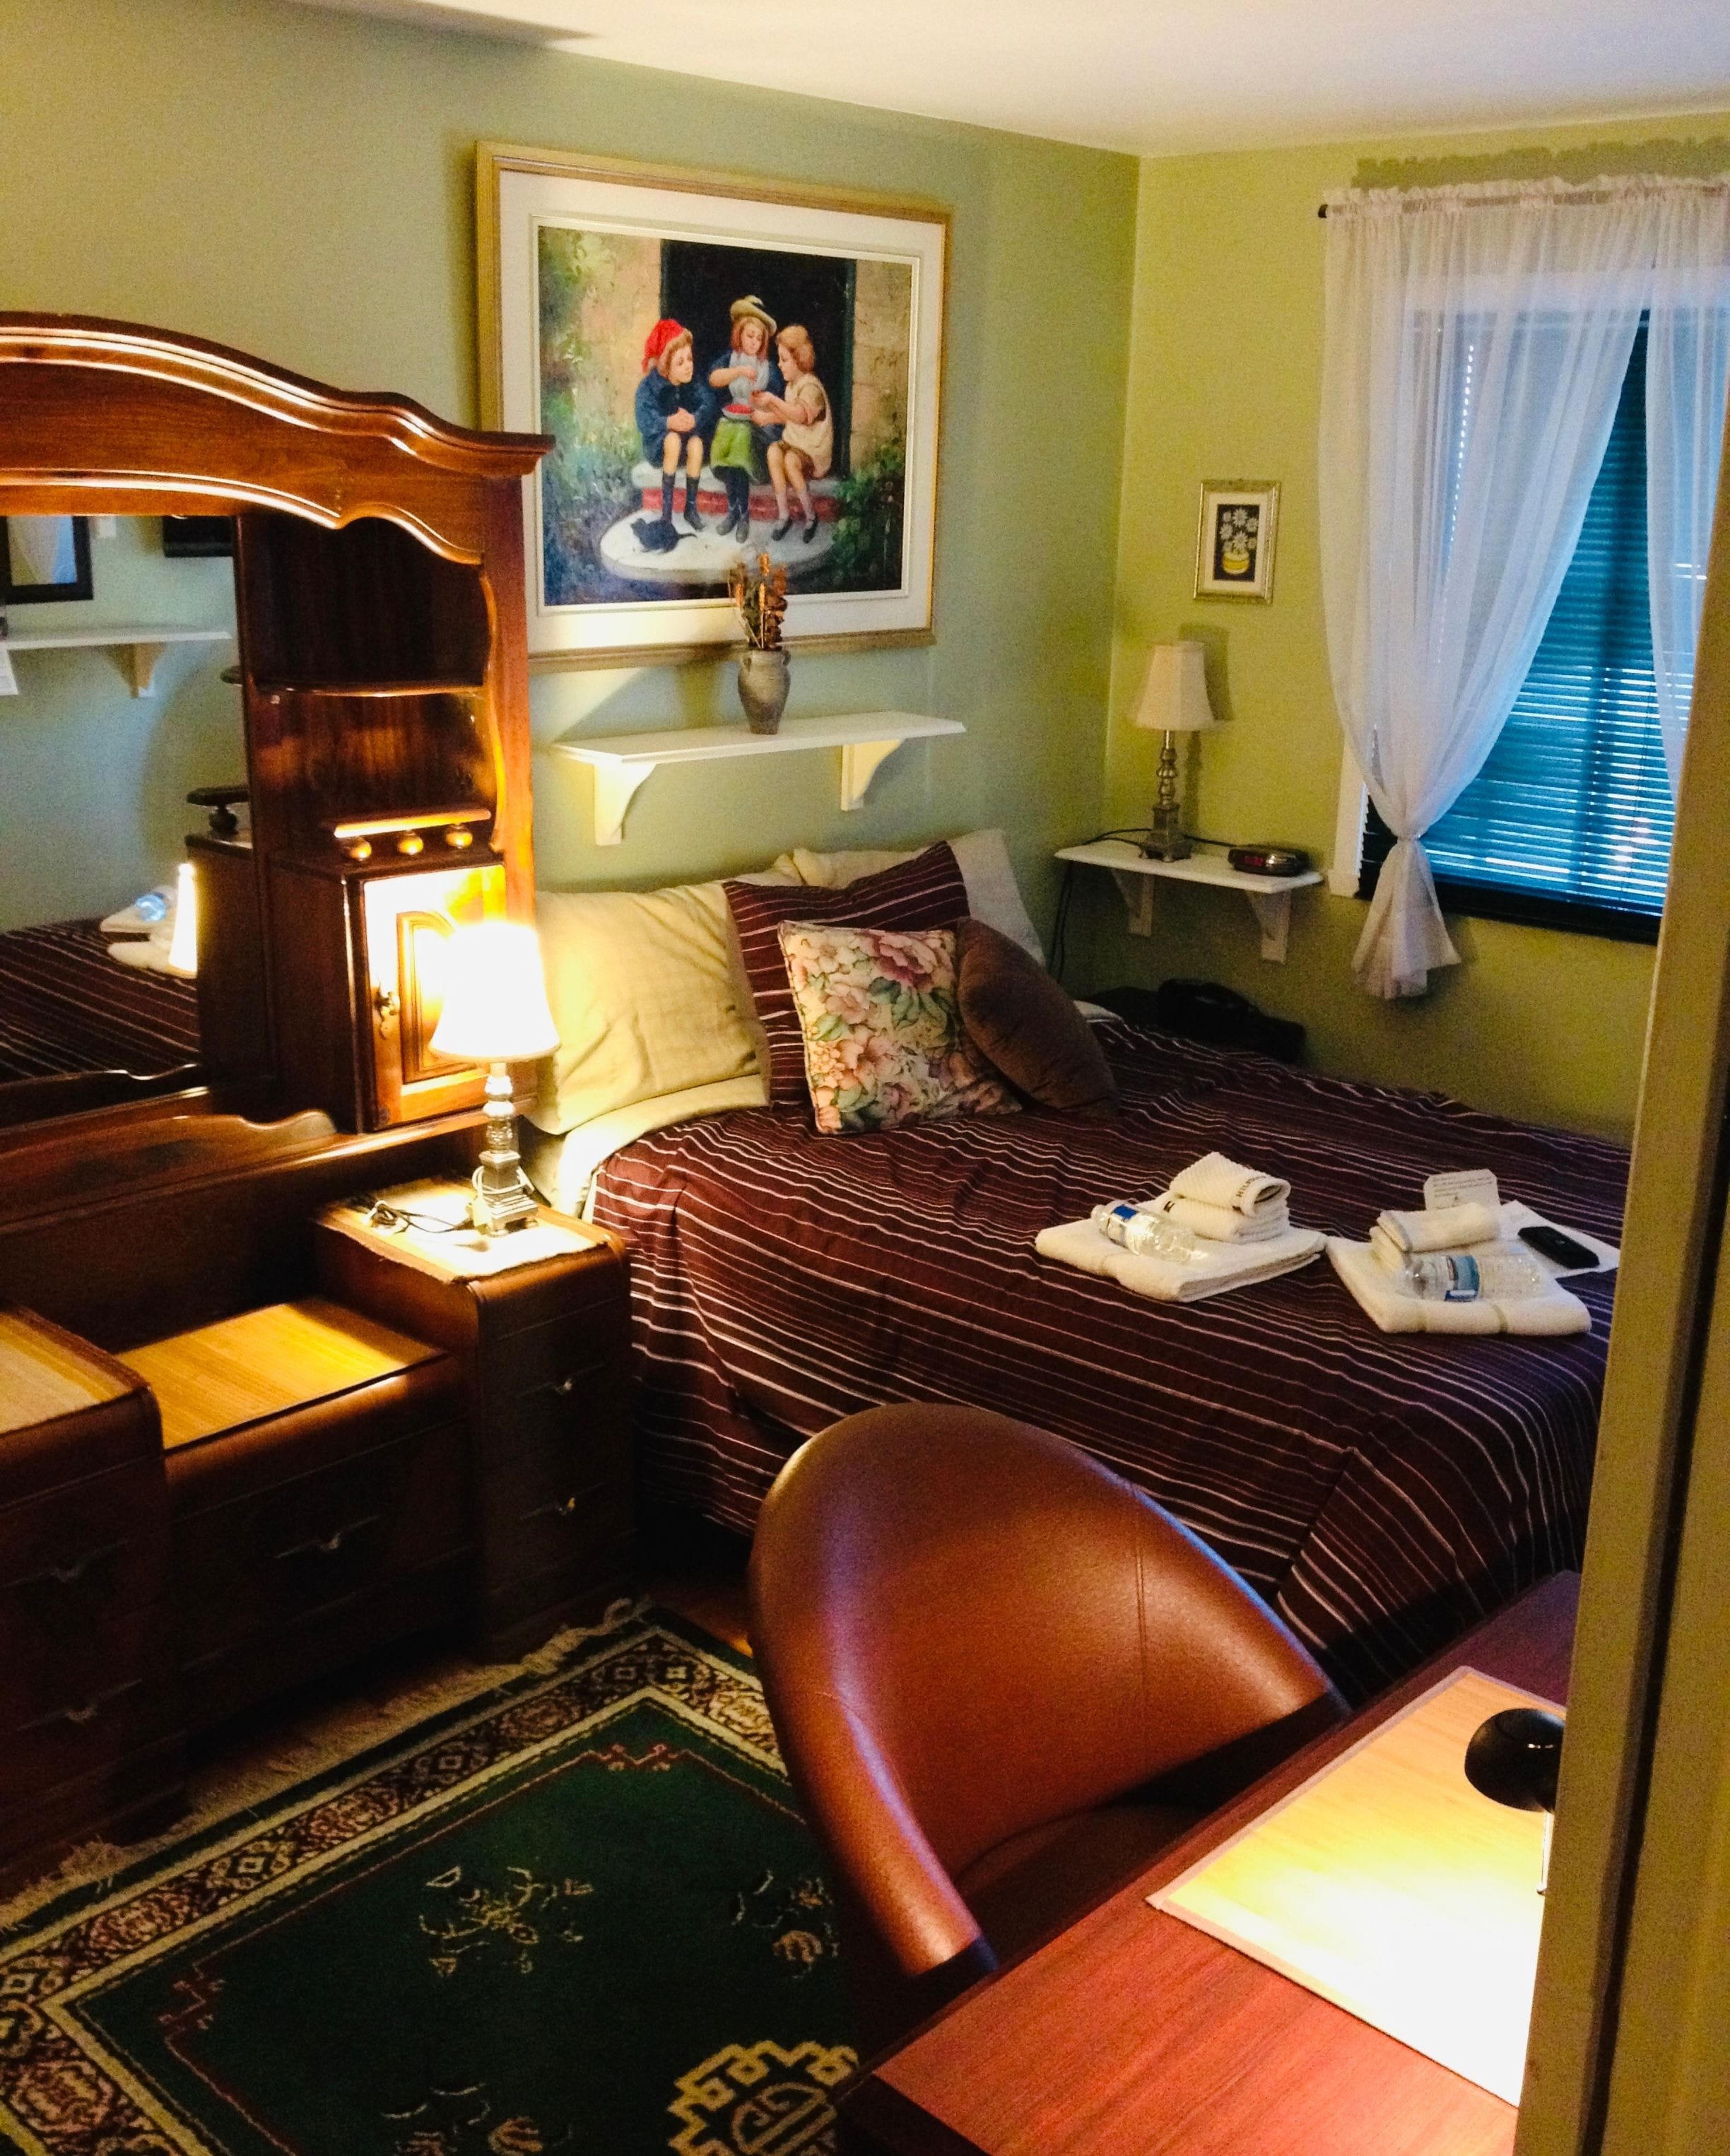 Executive Room, sleeps 2 guests, starting at $177 CAN